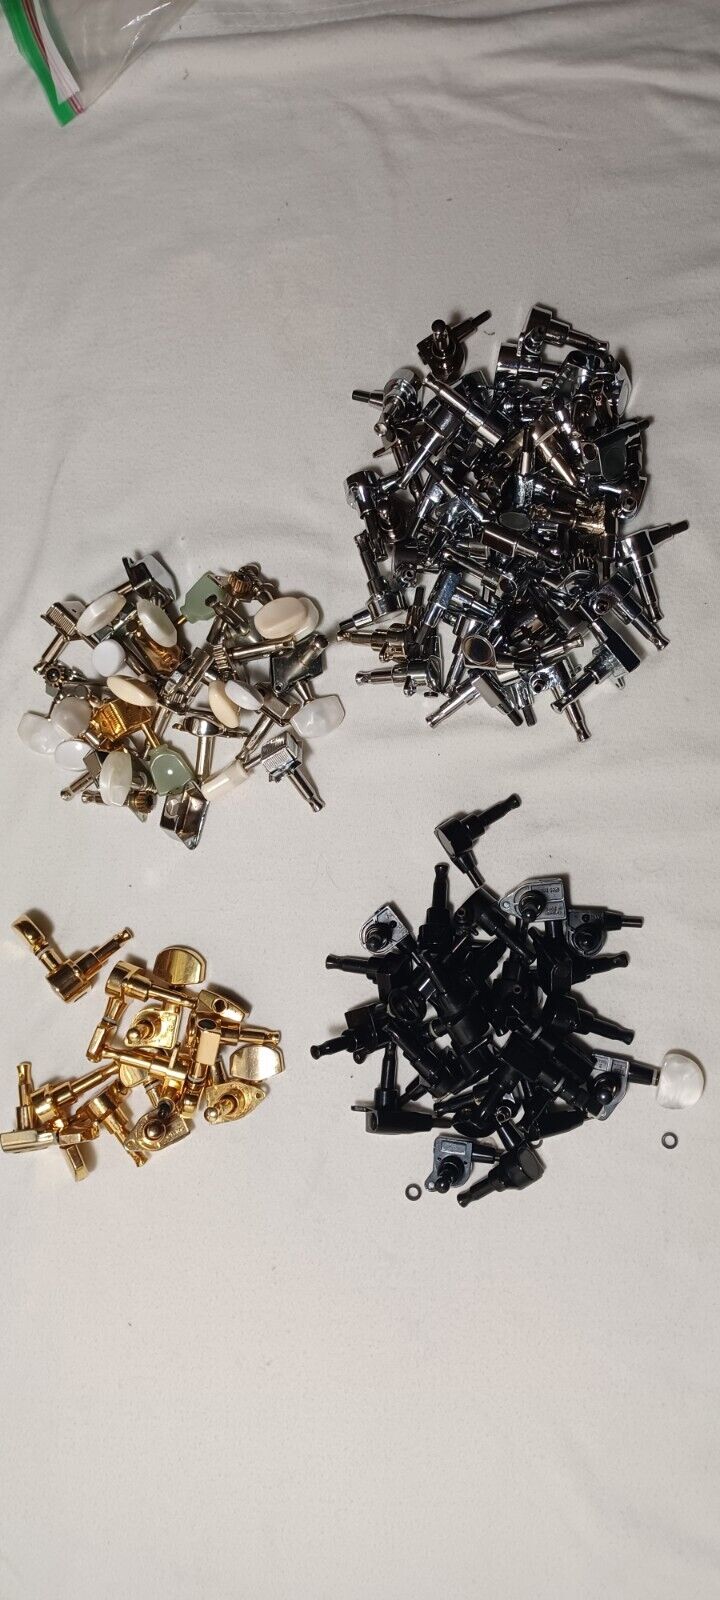 Lot Of +90 Guitar Machine Head Gears And Casings - Chrome/black/gold